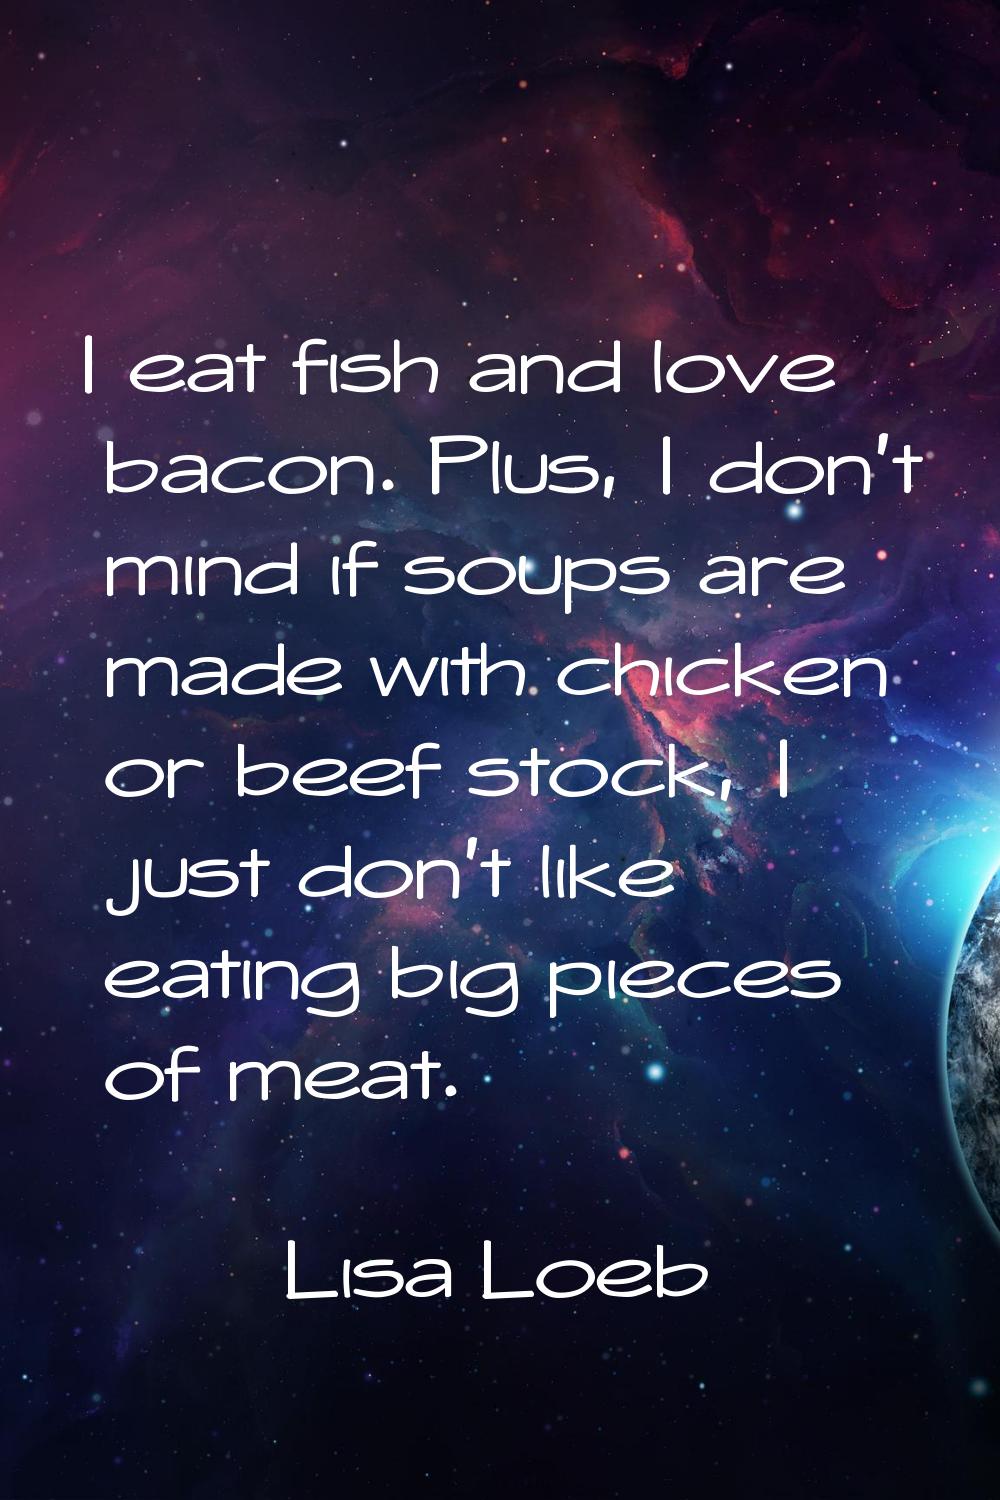 I eat fish and love bacon. Plus, I don't mind if soups are made with chicken or beef stock, I just 